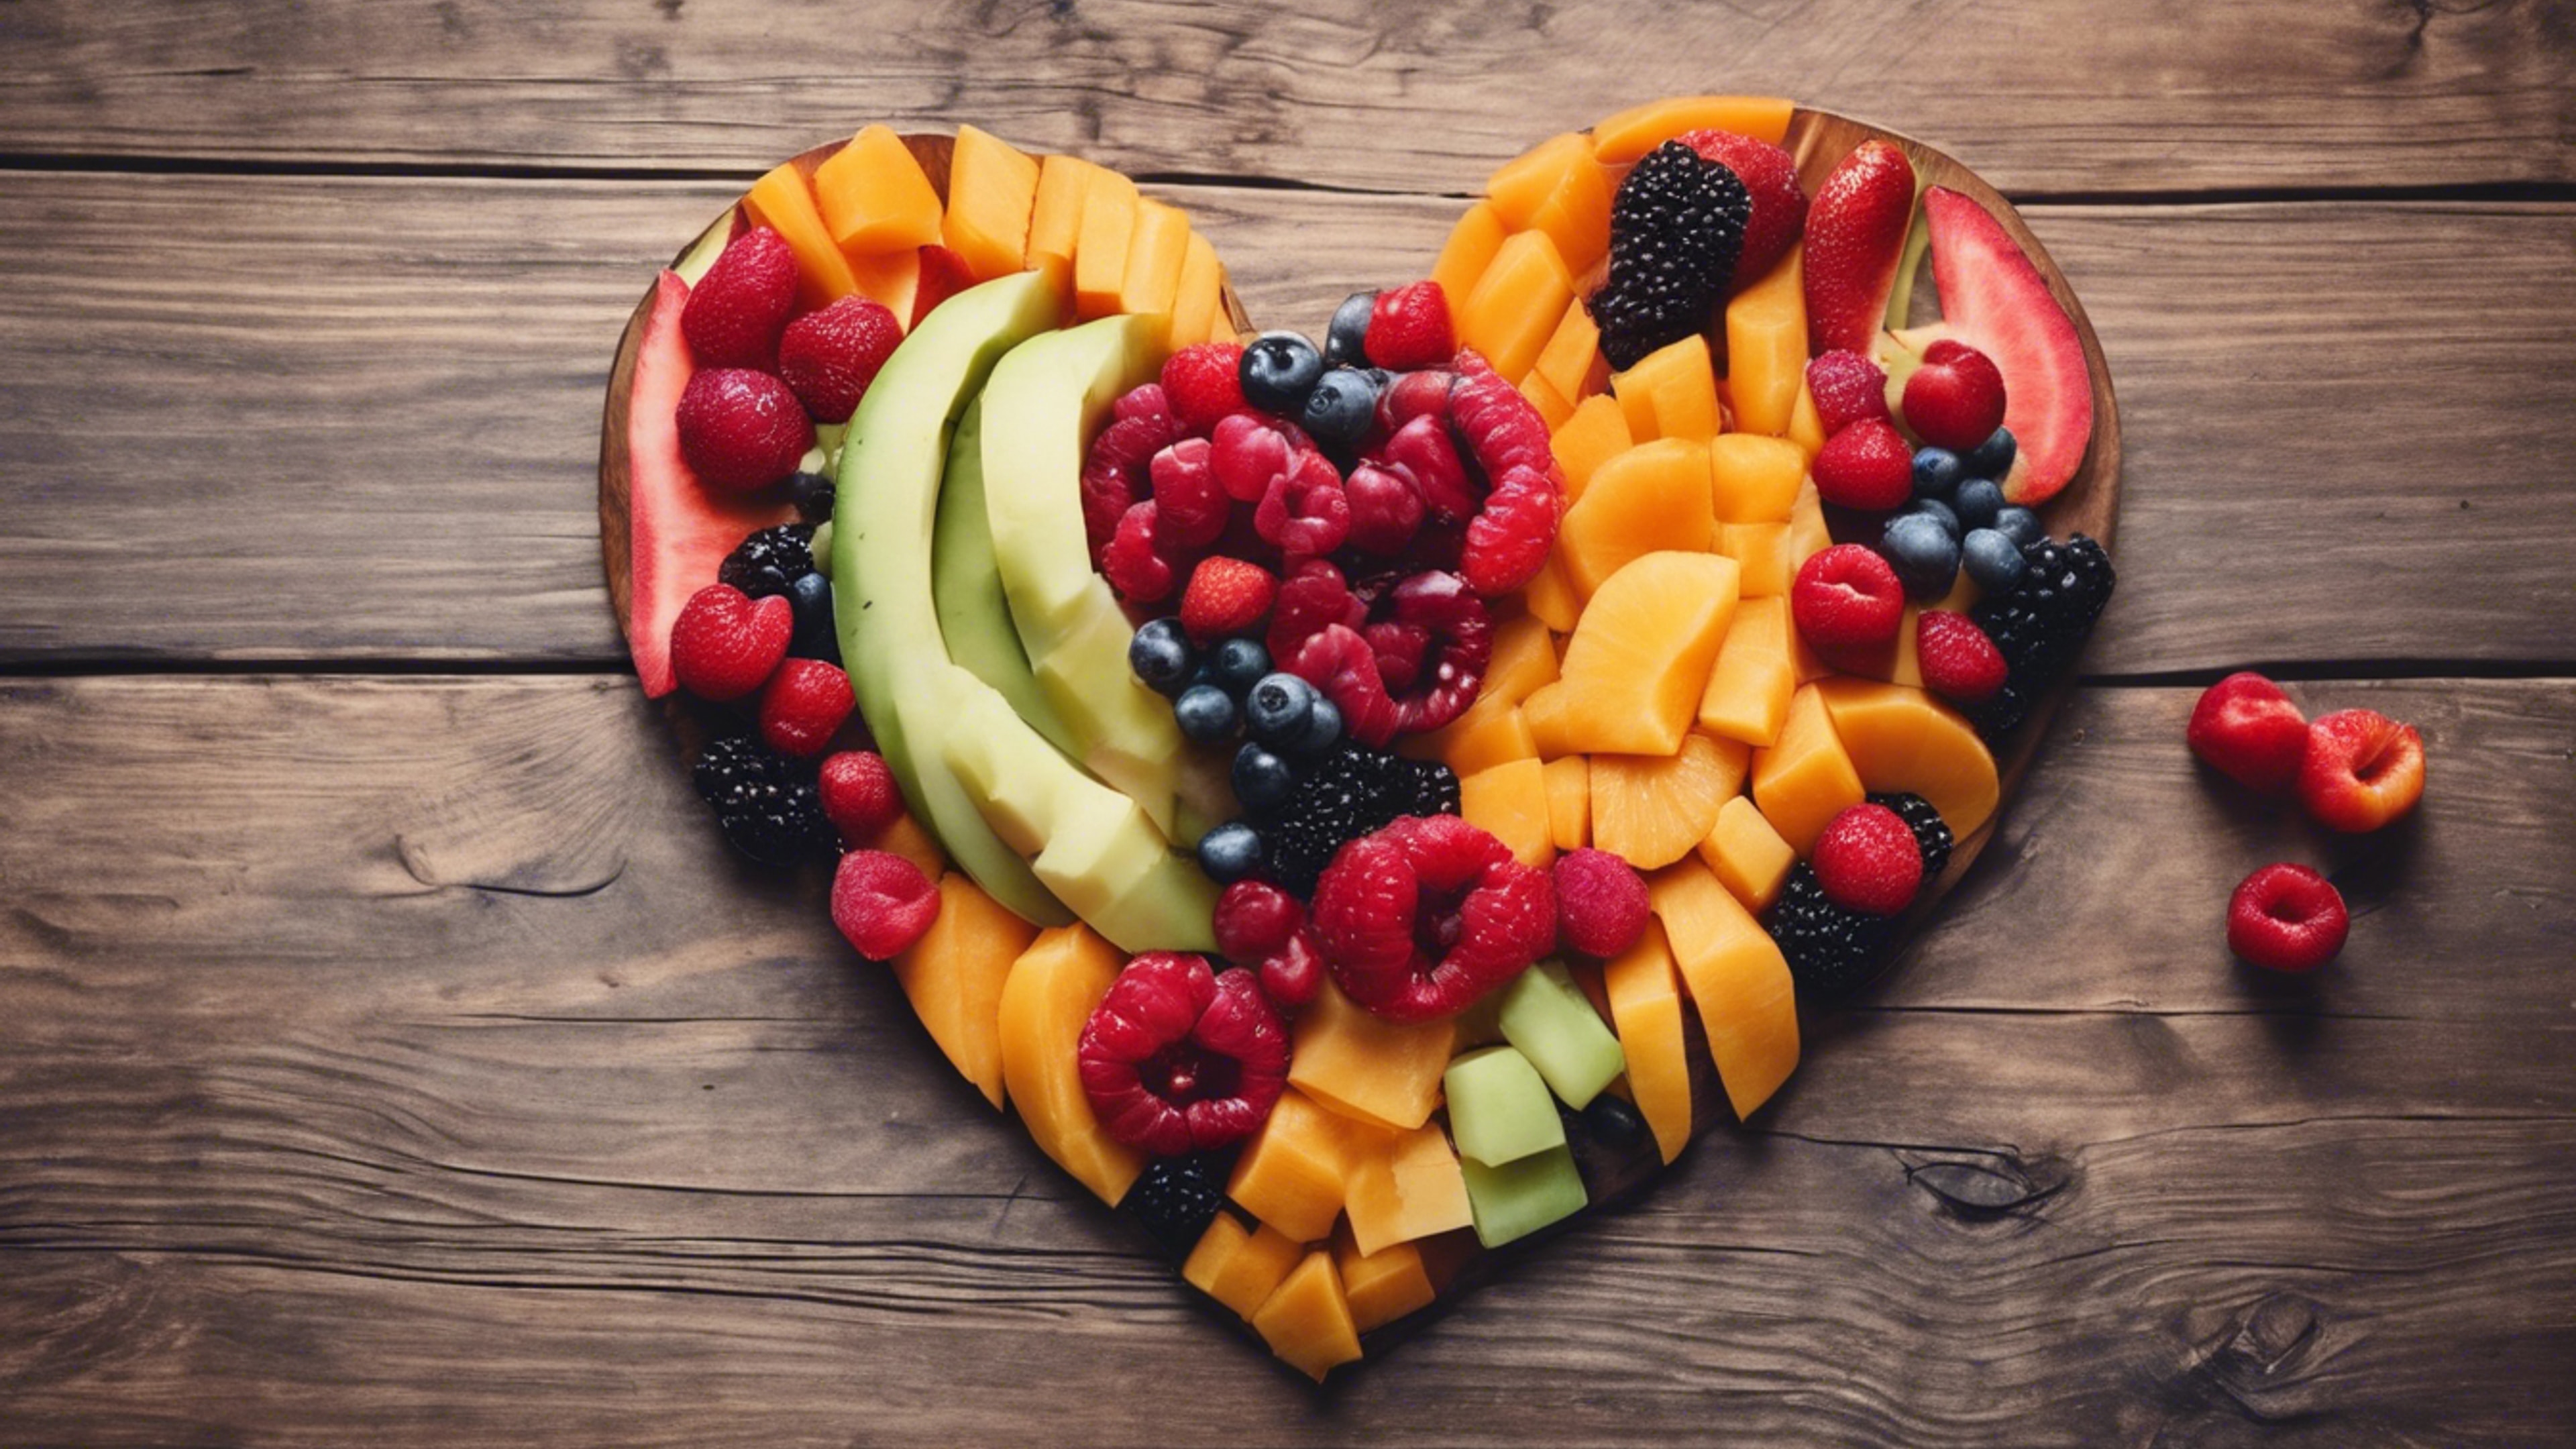 Sliced fruits forming a heart shape, symbolizing love for healthy diet.壁紙[c99cfbdb5254419192f9]